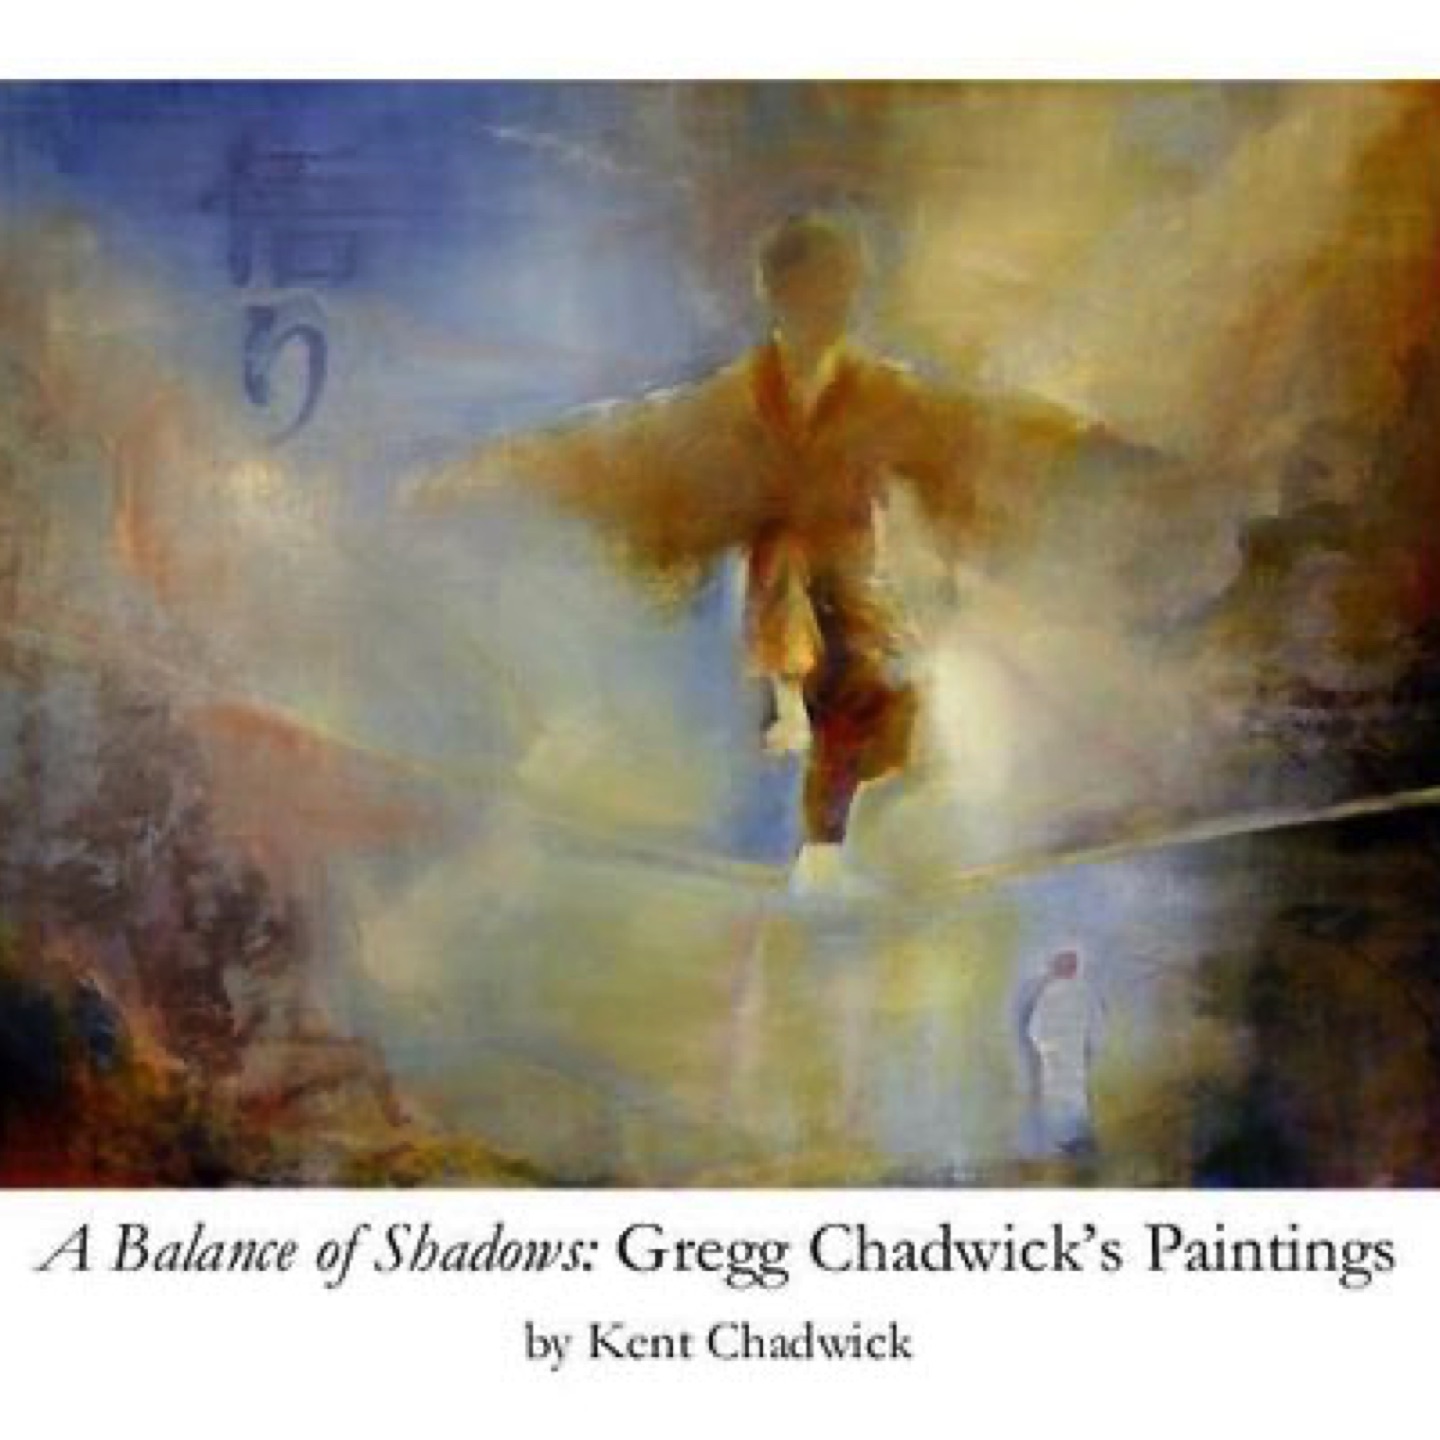 "A Balance of Shadows: Gregg Chadwick's Paintings", by the Artist’s Brother, Kent Chadwick,